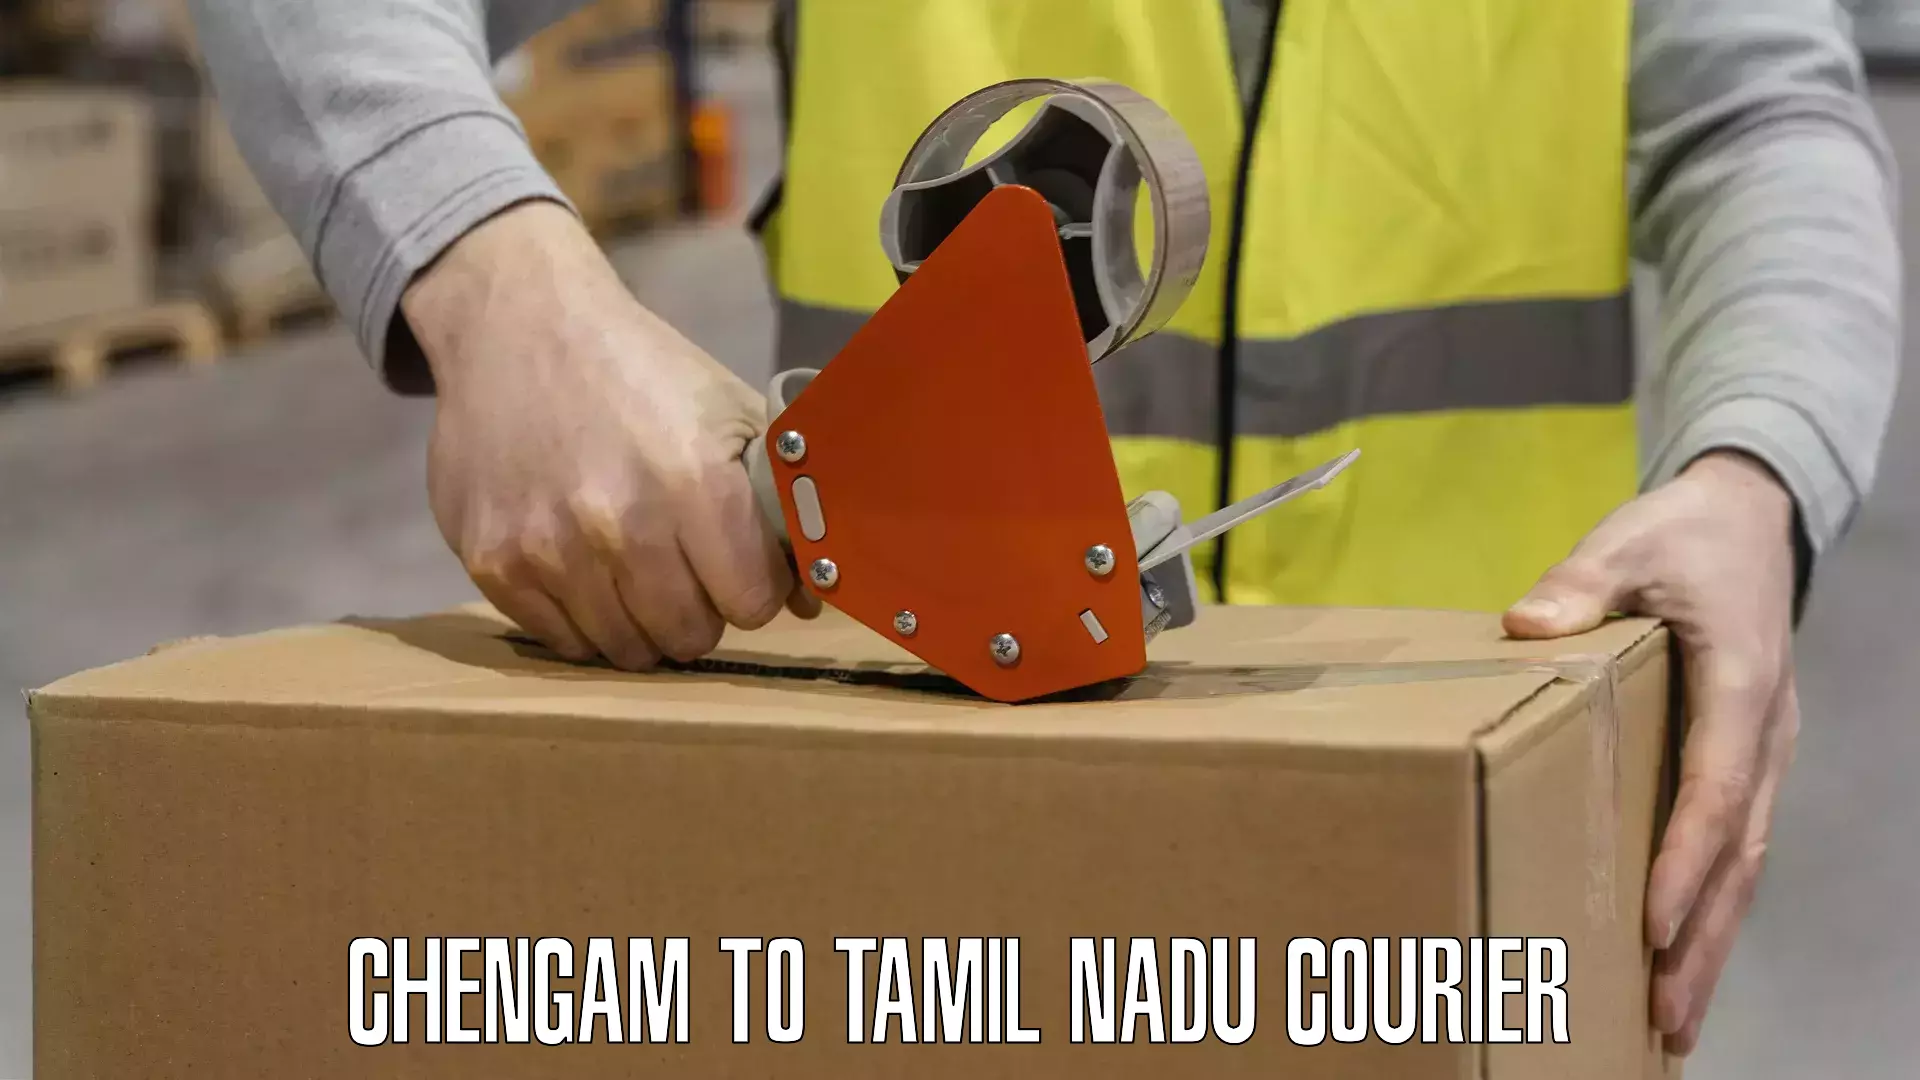 Express courier capabilities Chengam to Ennore Port Chennai